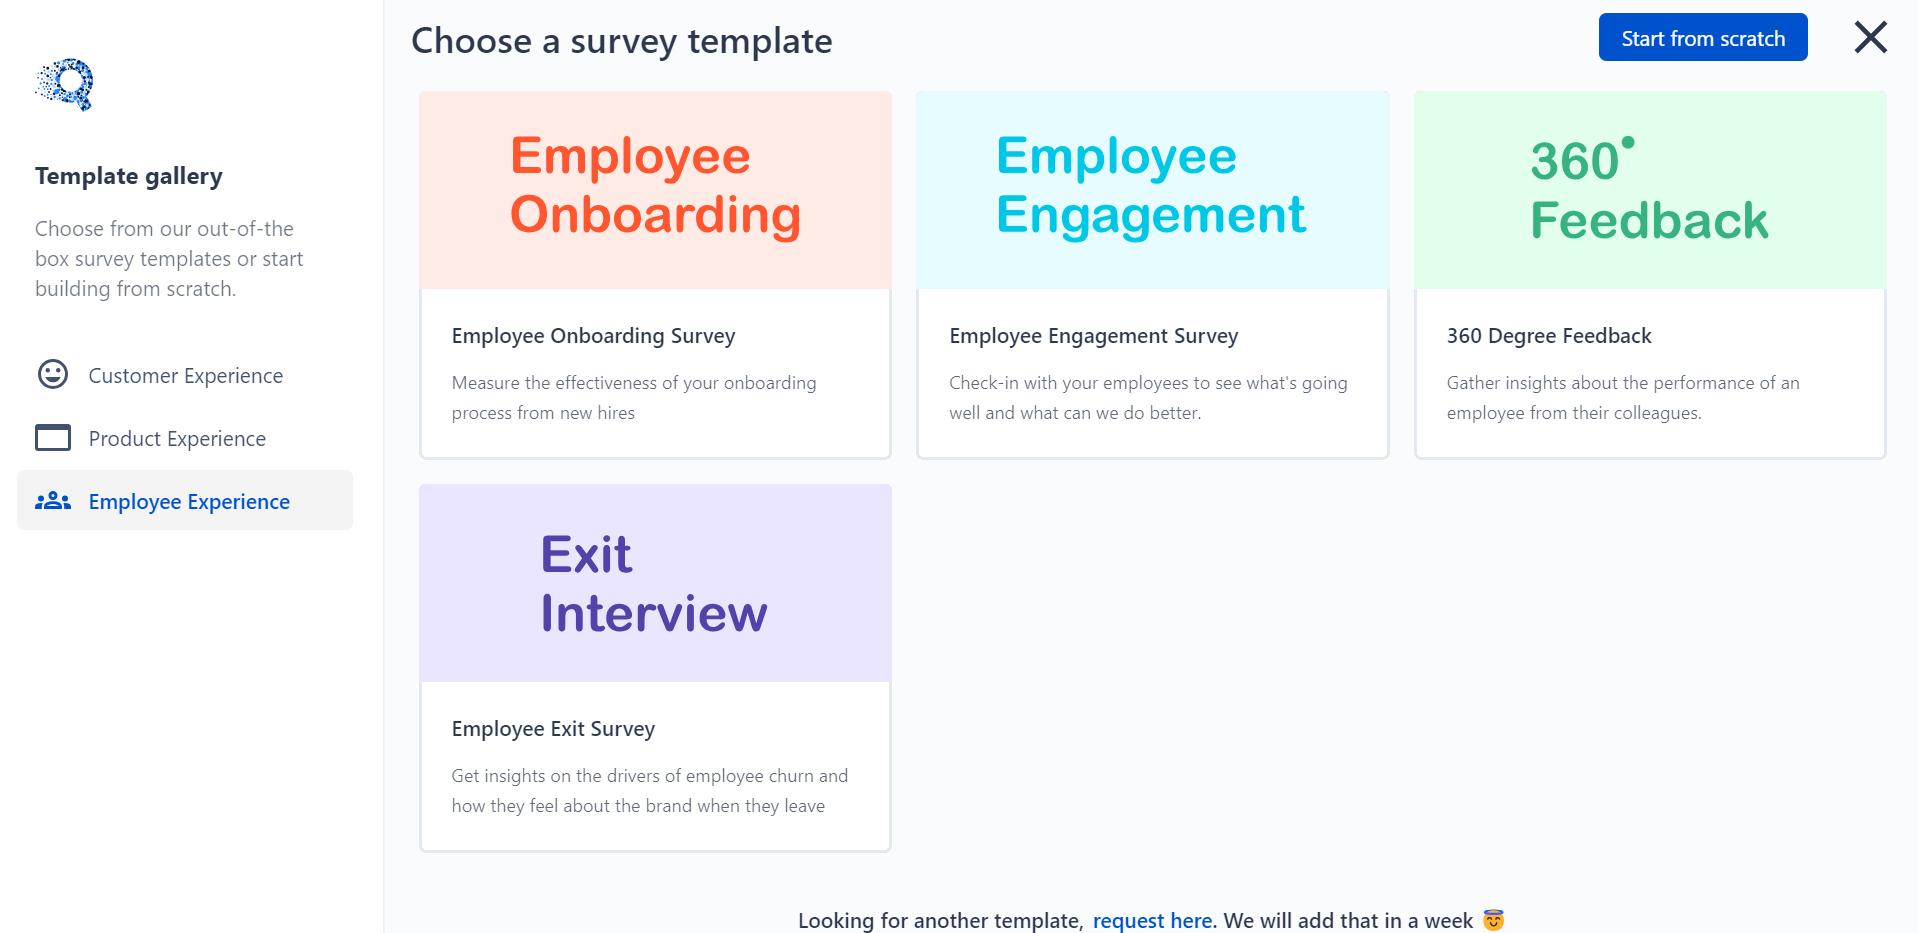 This image shows the different survey templates of employee experience like employee onboarding, exit survey, etc on the SurveySensum survey-builder tool. 